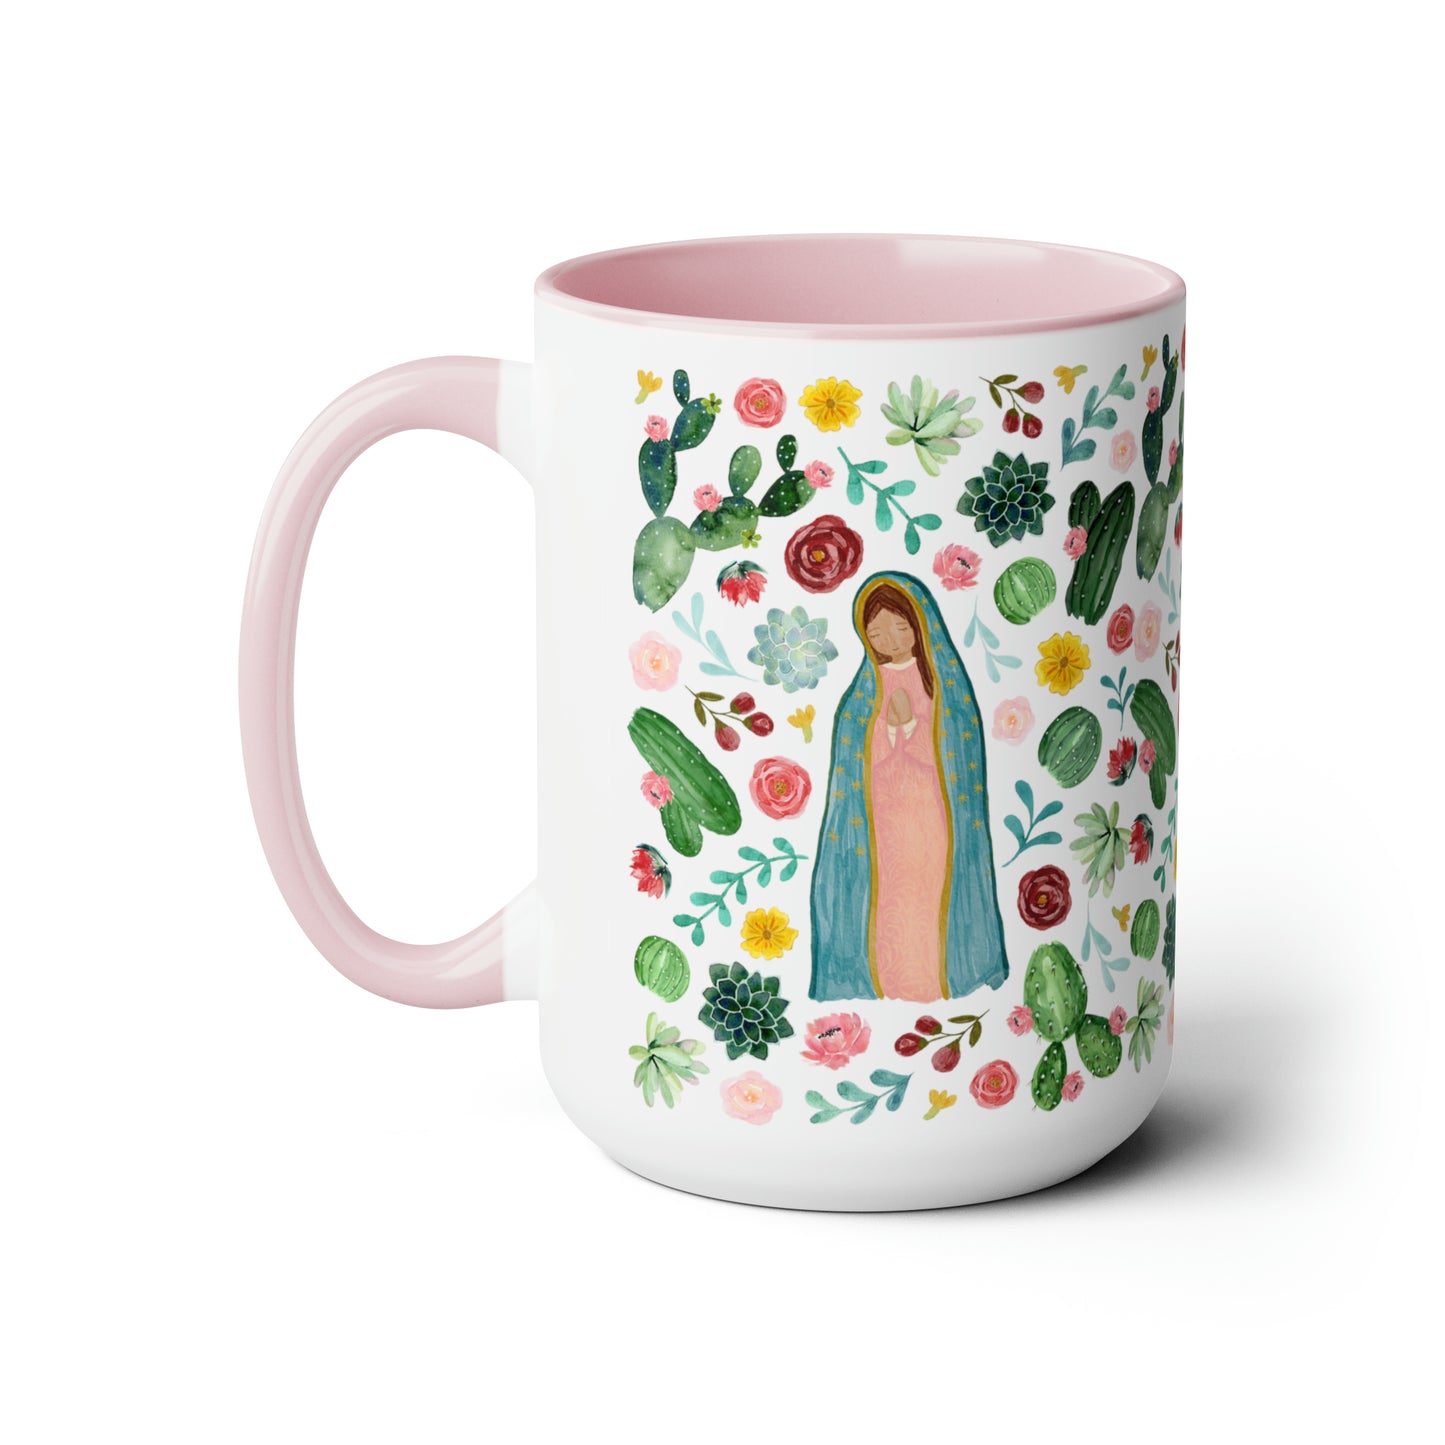 Virgen de Guadalupe Coffee Mugs, 15oz for mother, friends. Catholic gift for her. Virgencita cup.